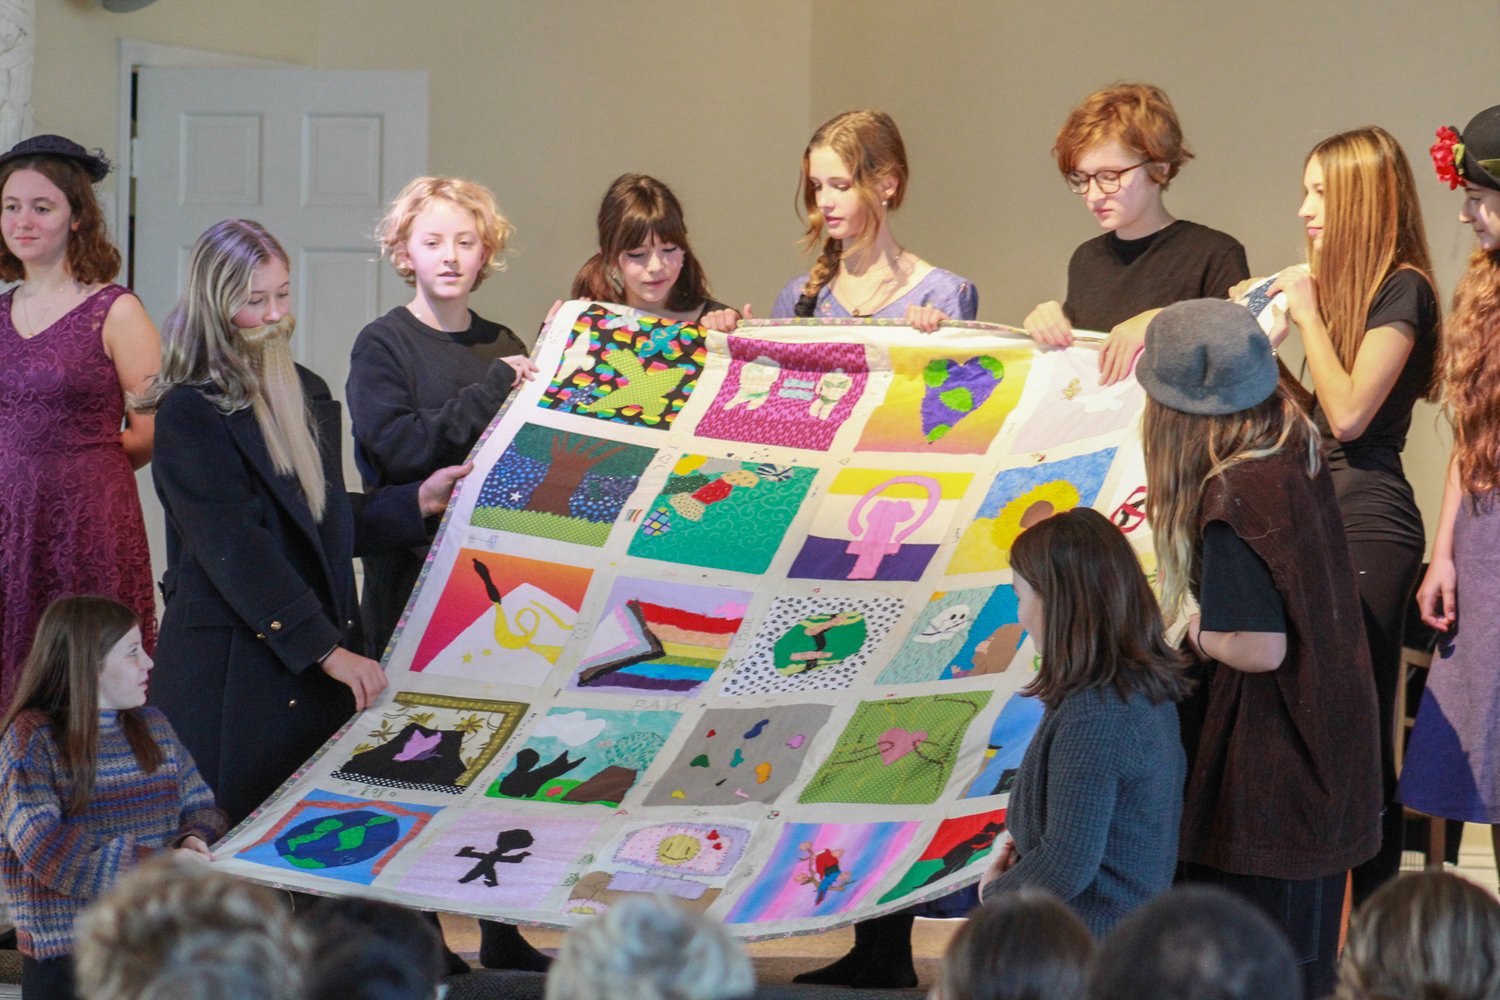 OHMS girls displaying their quilt project